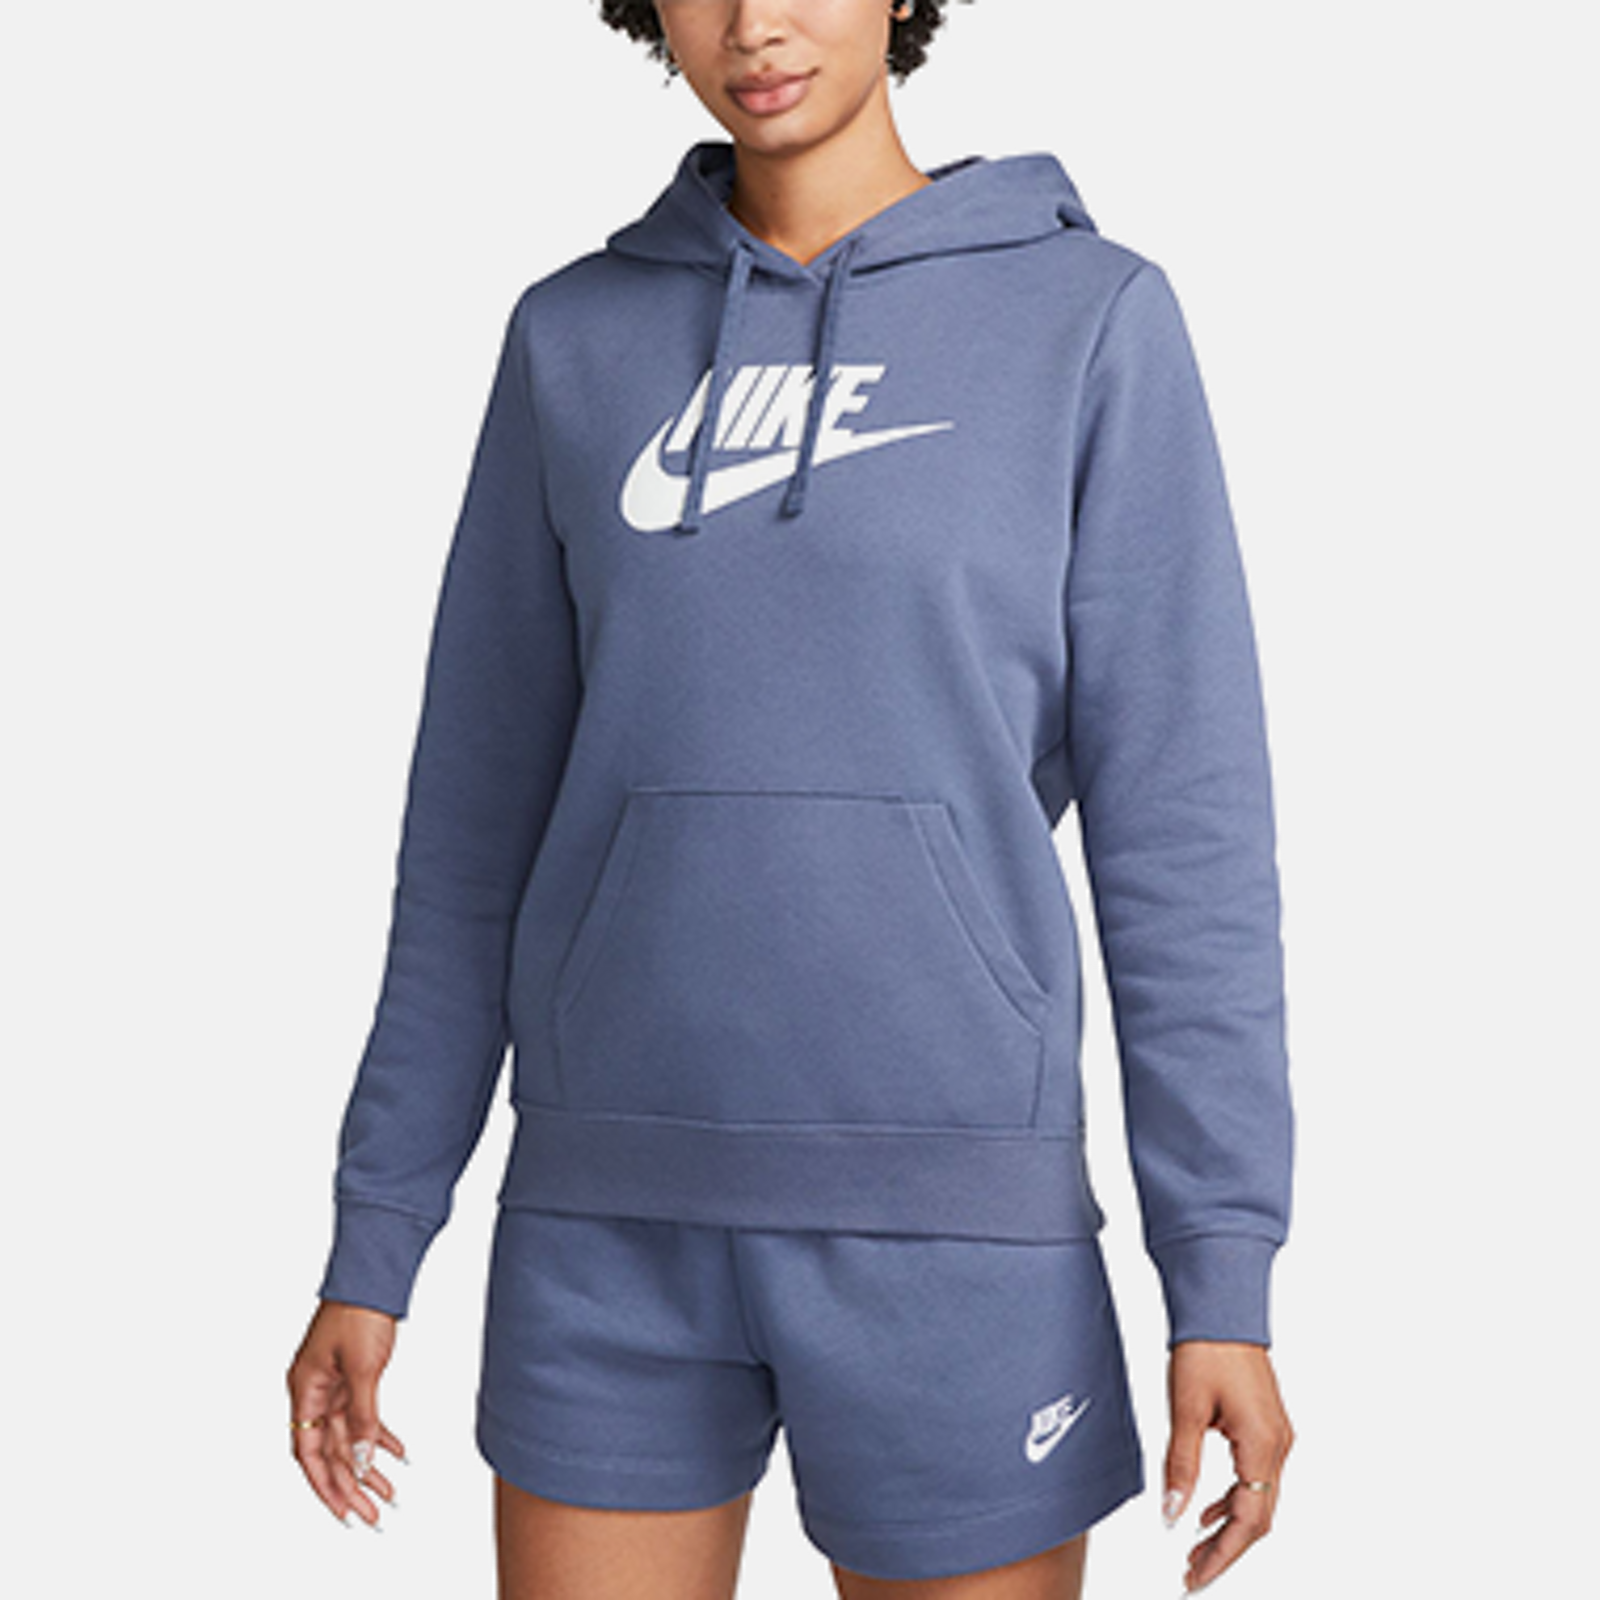 Nike Workout Clothing & Activewear for Women - Macy's